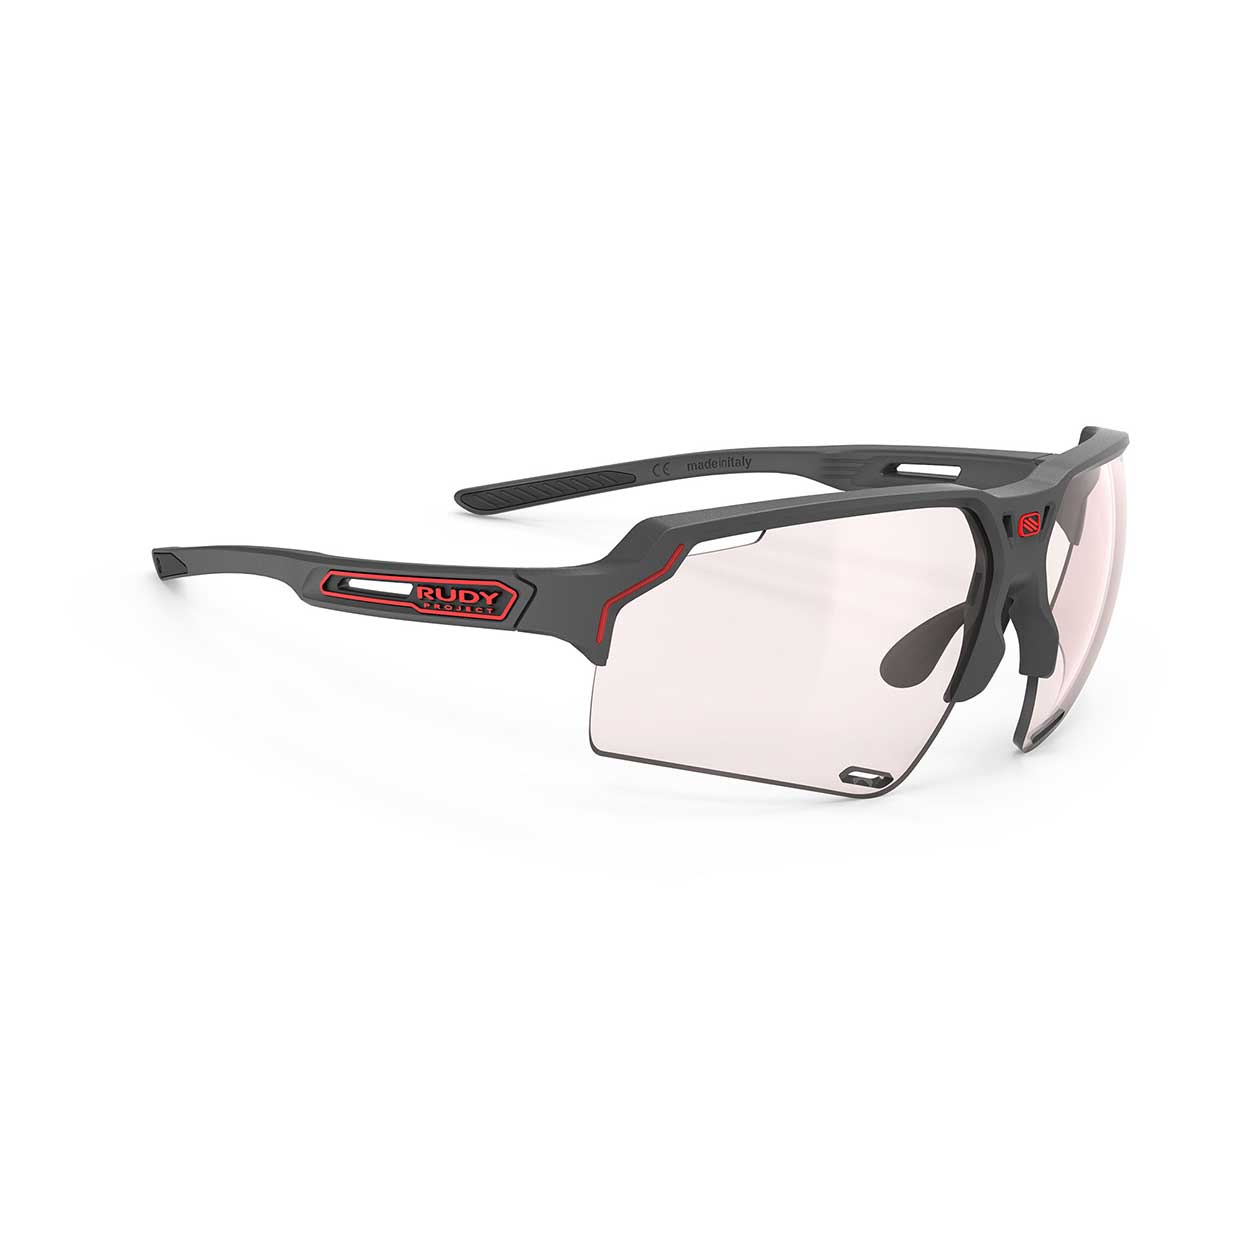 SP747438-0000 - Charcoal Matte - ImpactX Photochromic 2 Red